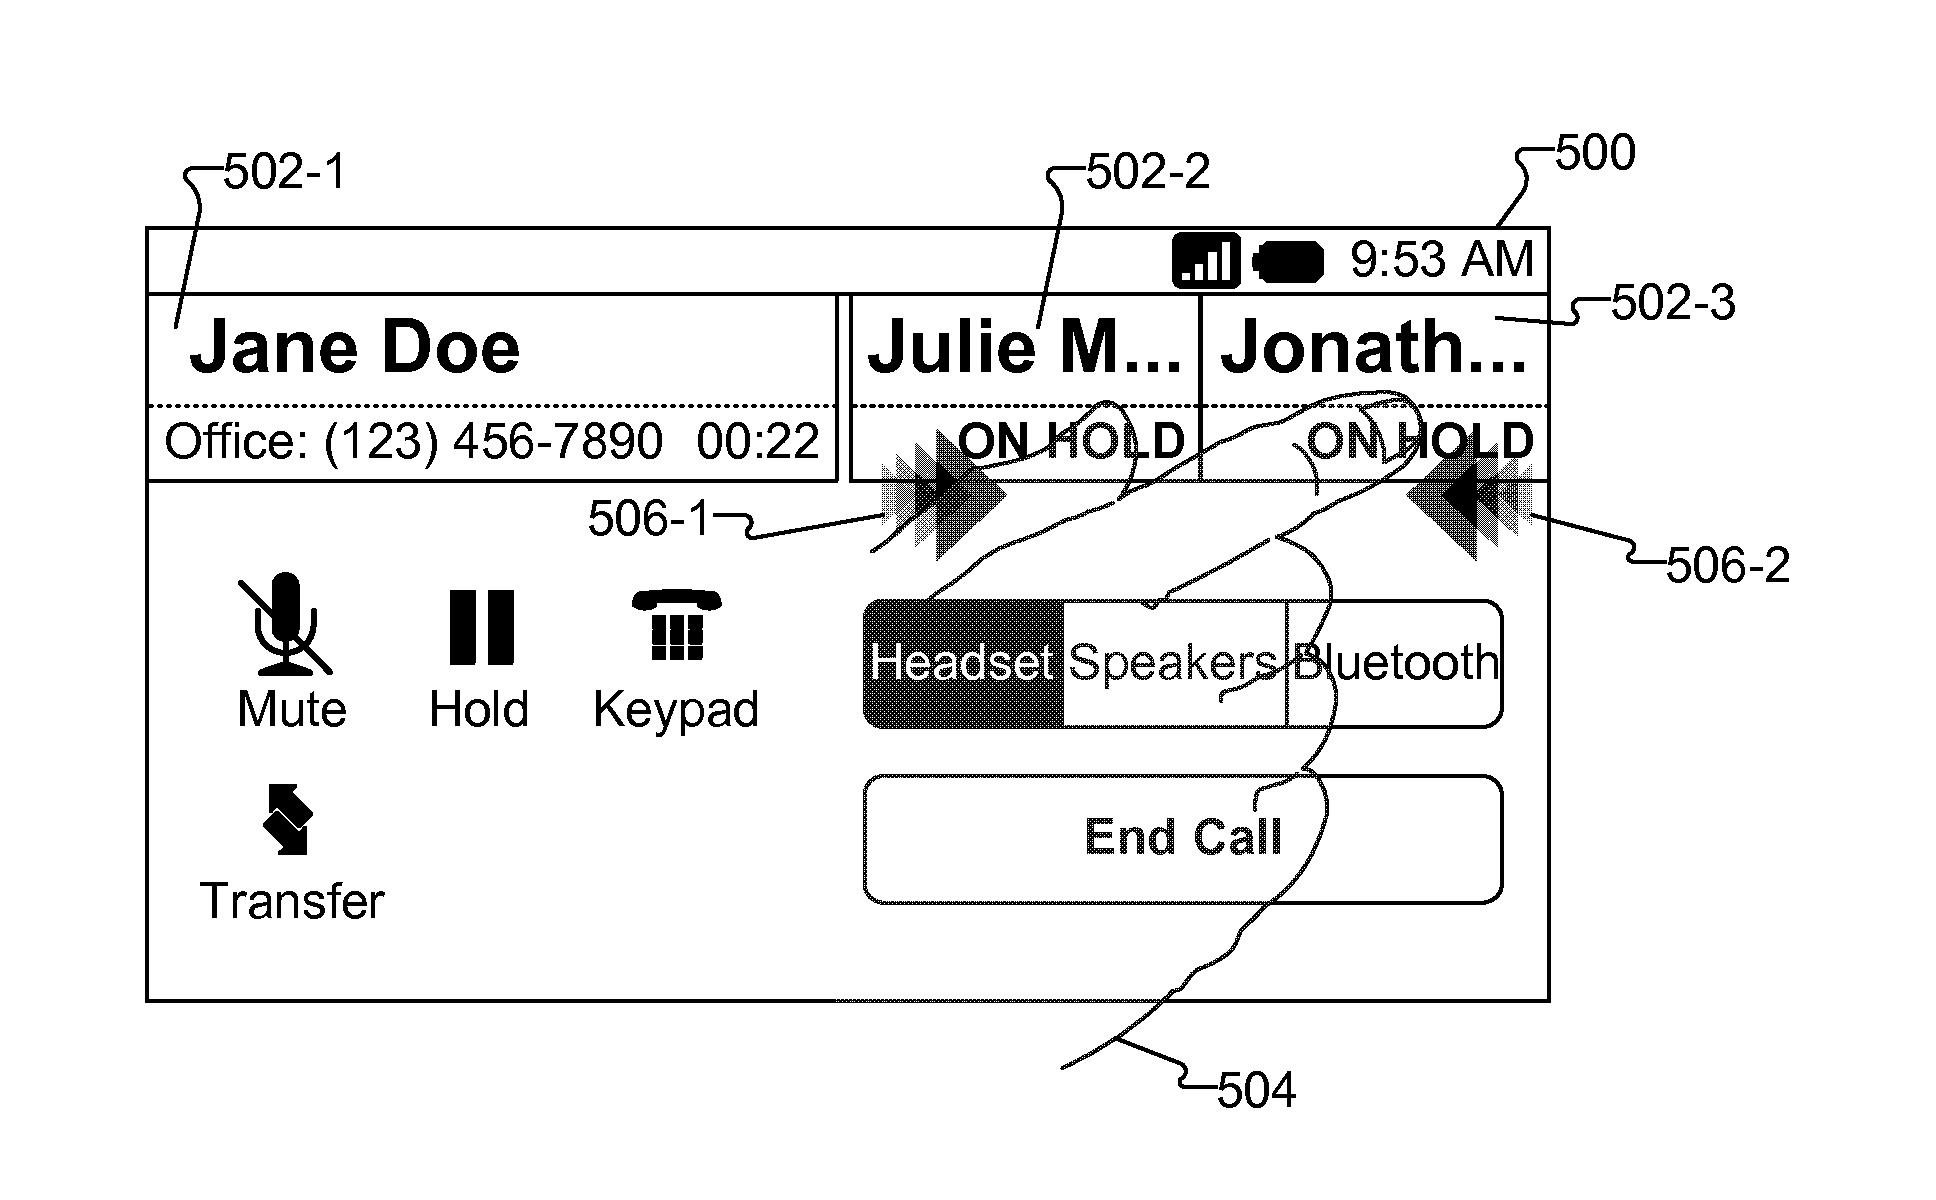 User interfaces for facilitating merging and splitting of communication sessions